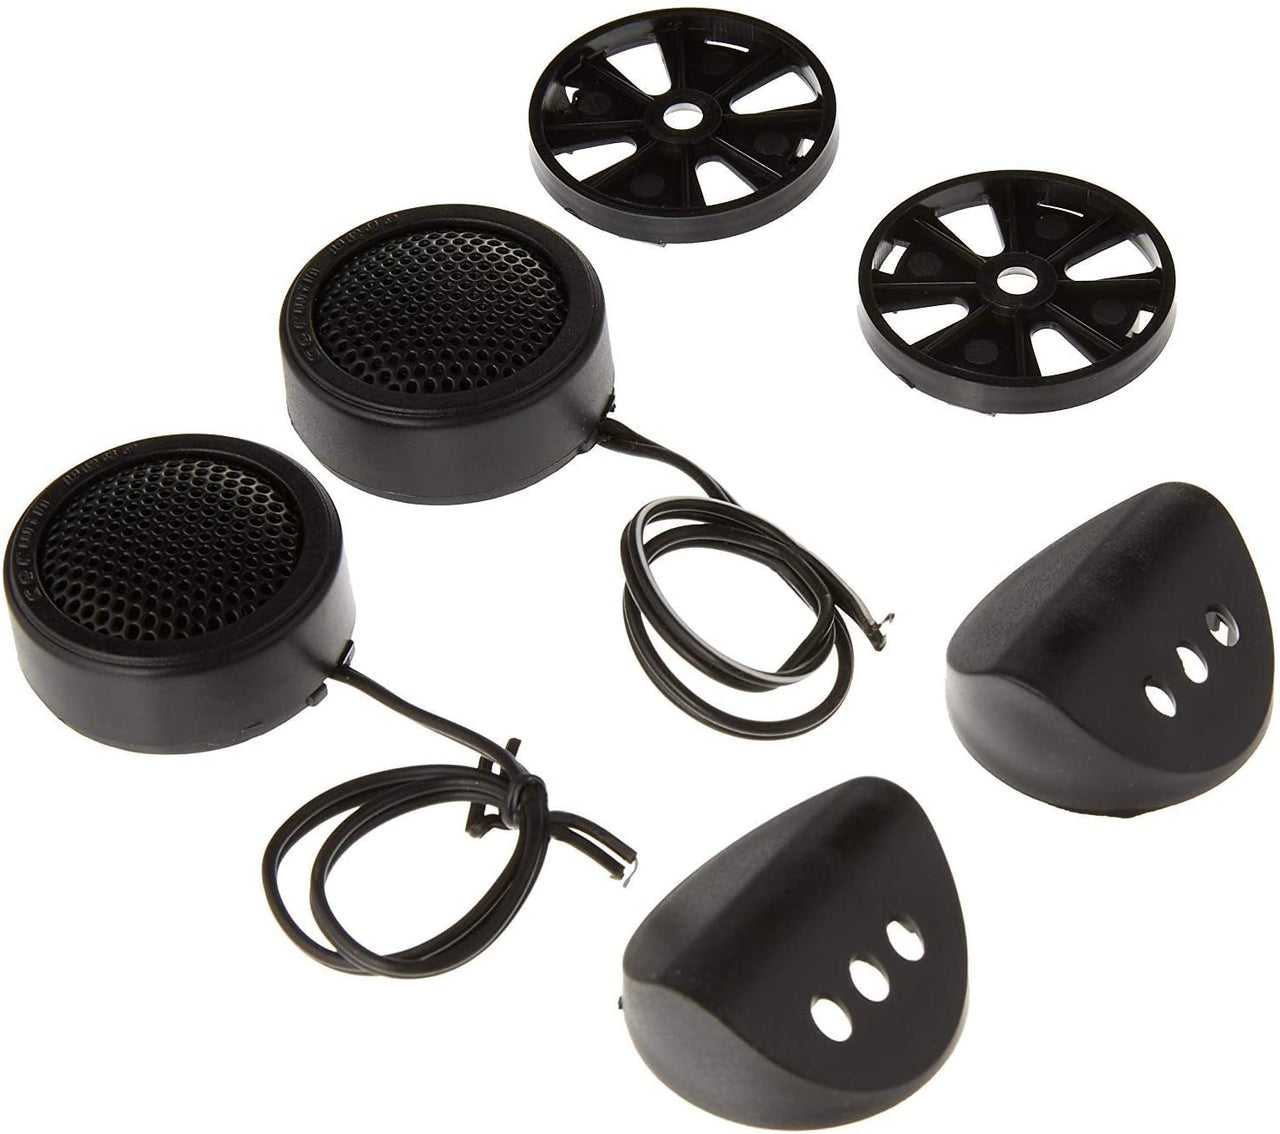 Absolute TW500 Mini Car Tweeter Kit 500 Watts of Power, High-Frequency Silk Dome Tweeters - 1.5" High Fidelity, Efficiency and Performance Audio System 4 ohm, Dual Mounting, Surface or Angle, Black